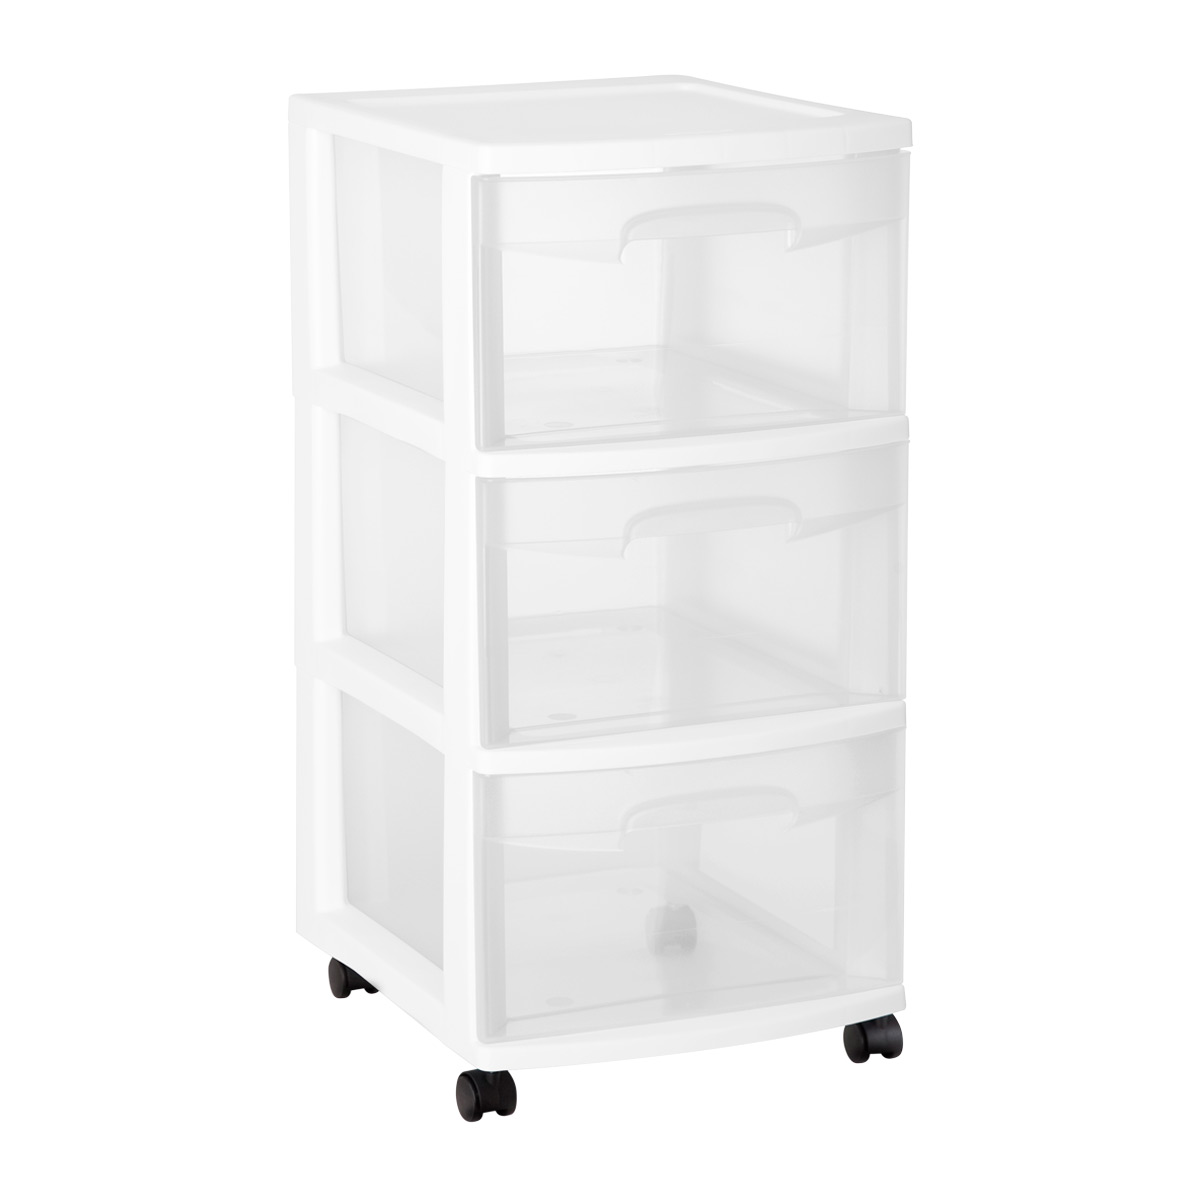 Sterilite 3 Drawer Chest With Wheels, Plastic Storage Cabinets With Drawers On Wheels